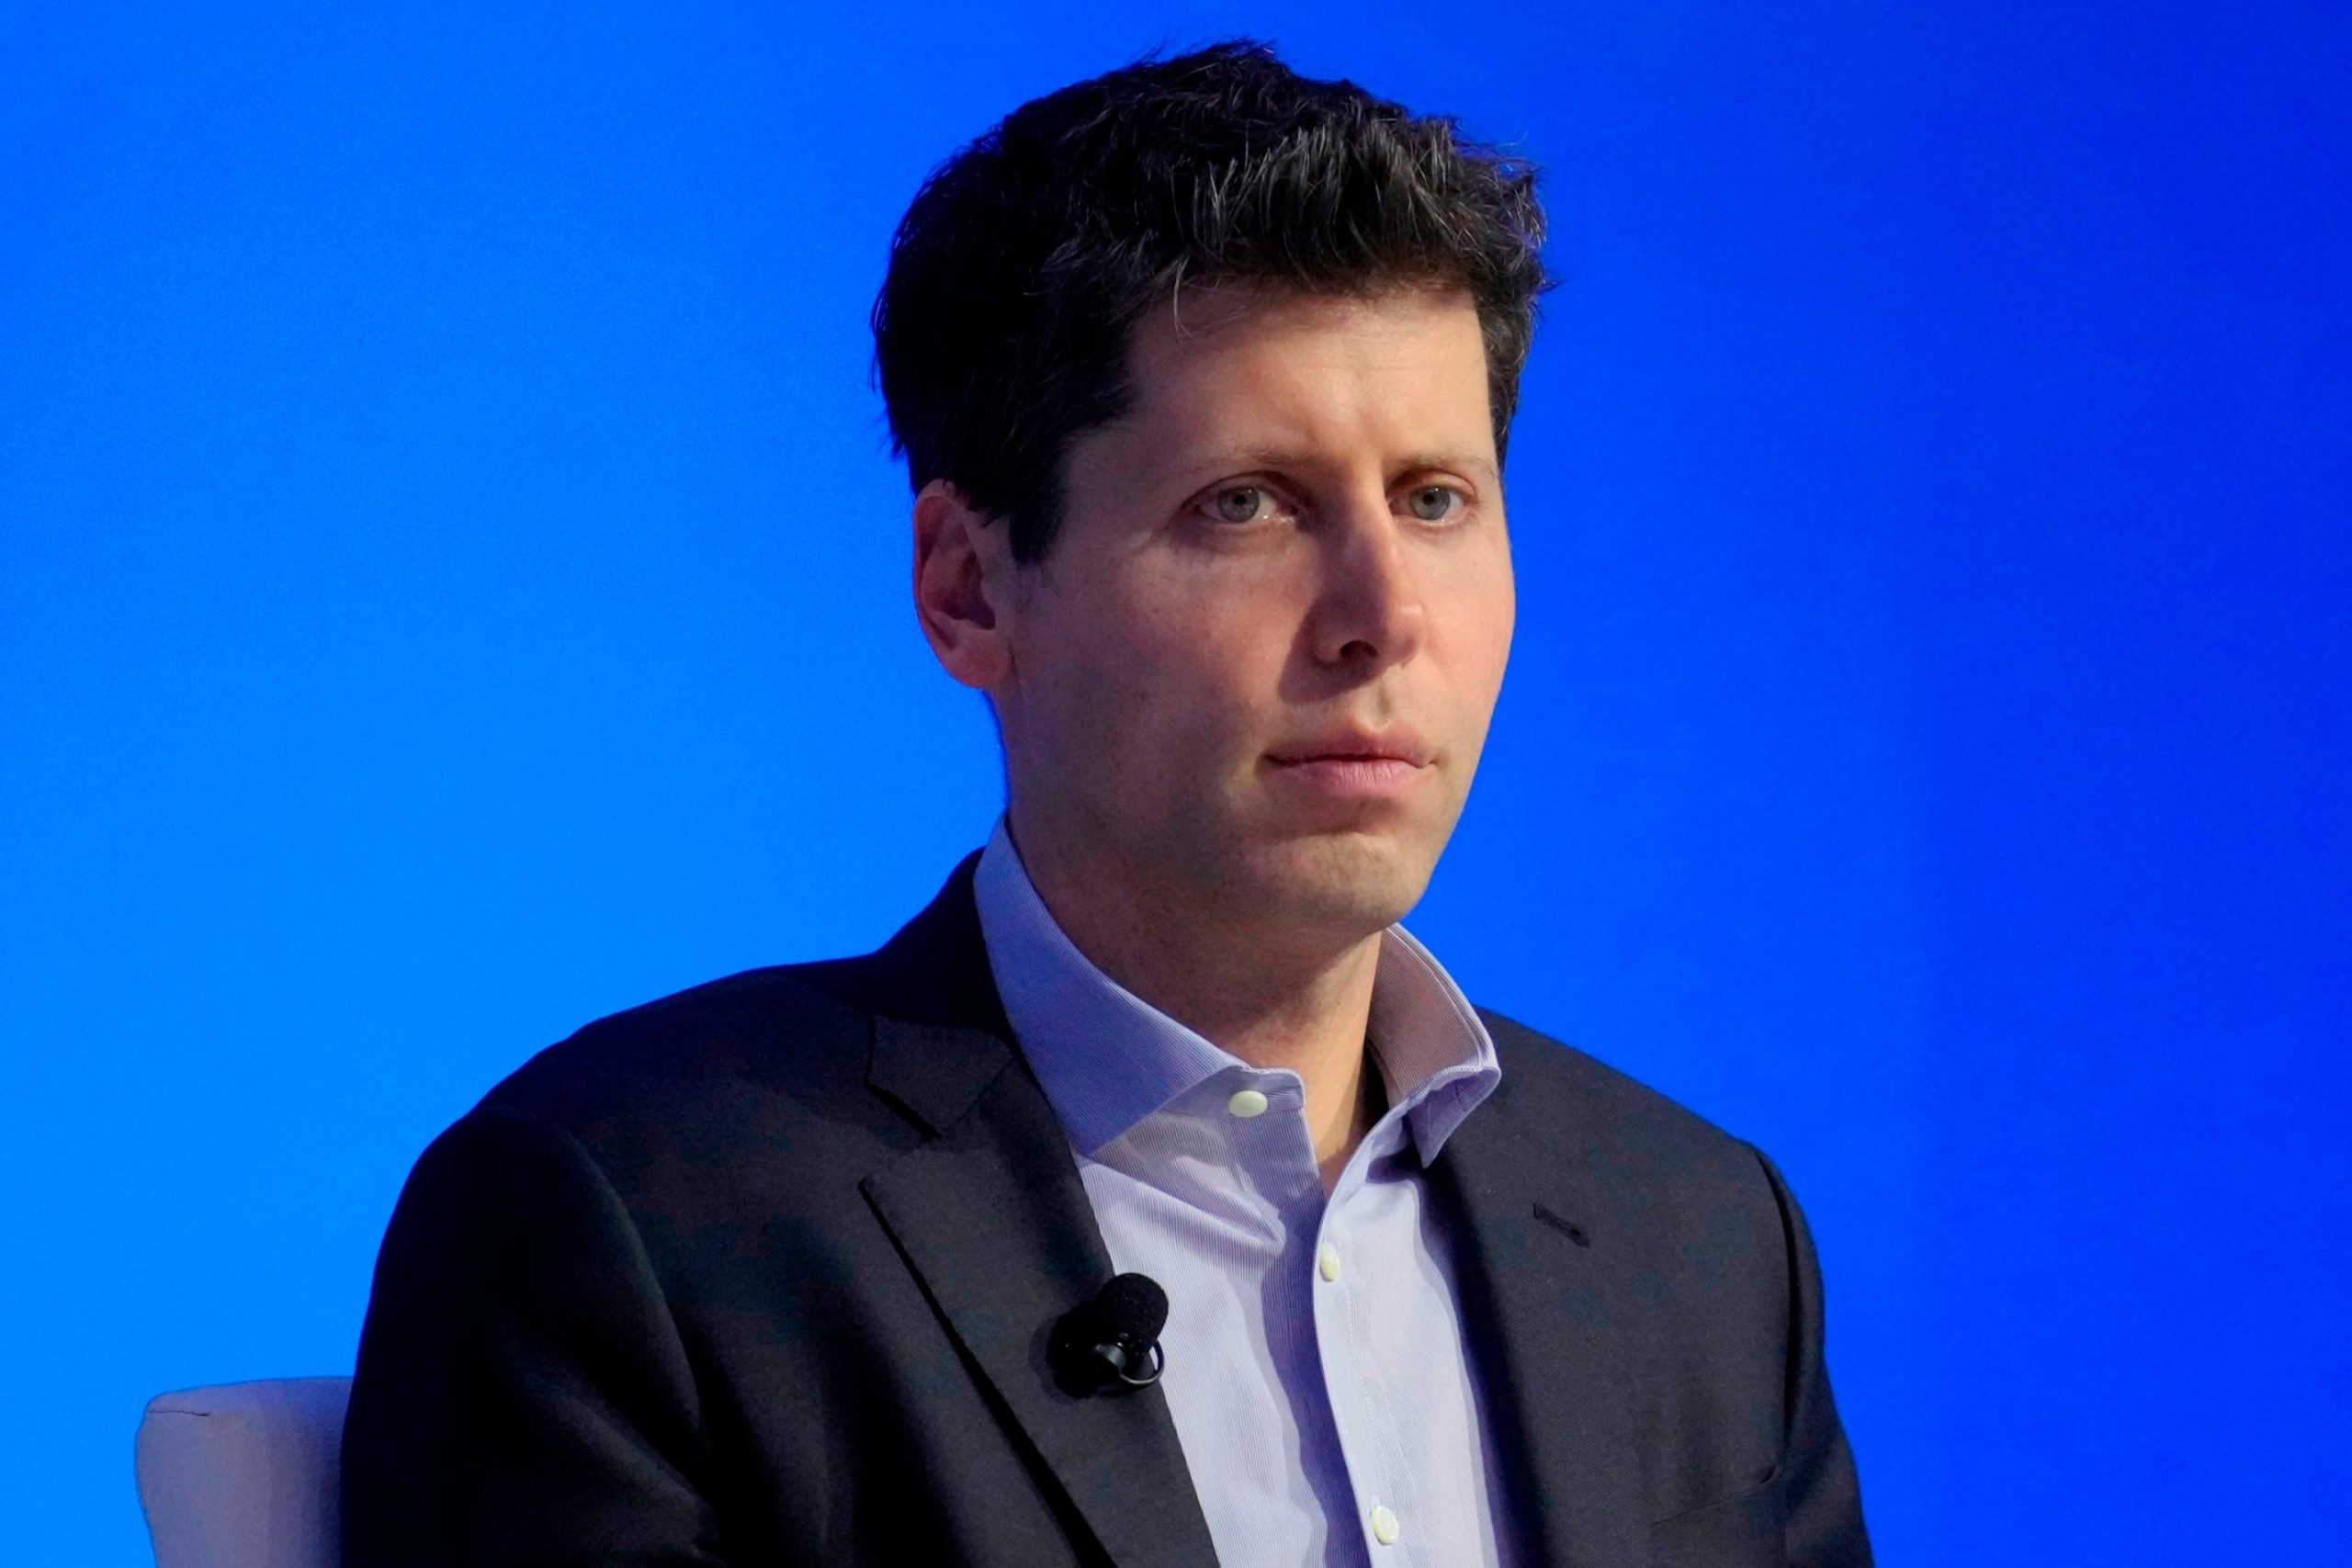 Sam Altman will continue as CEO of OpenAI and rejoin the board after external review